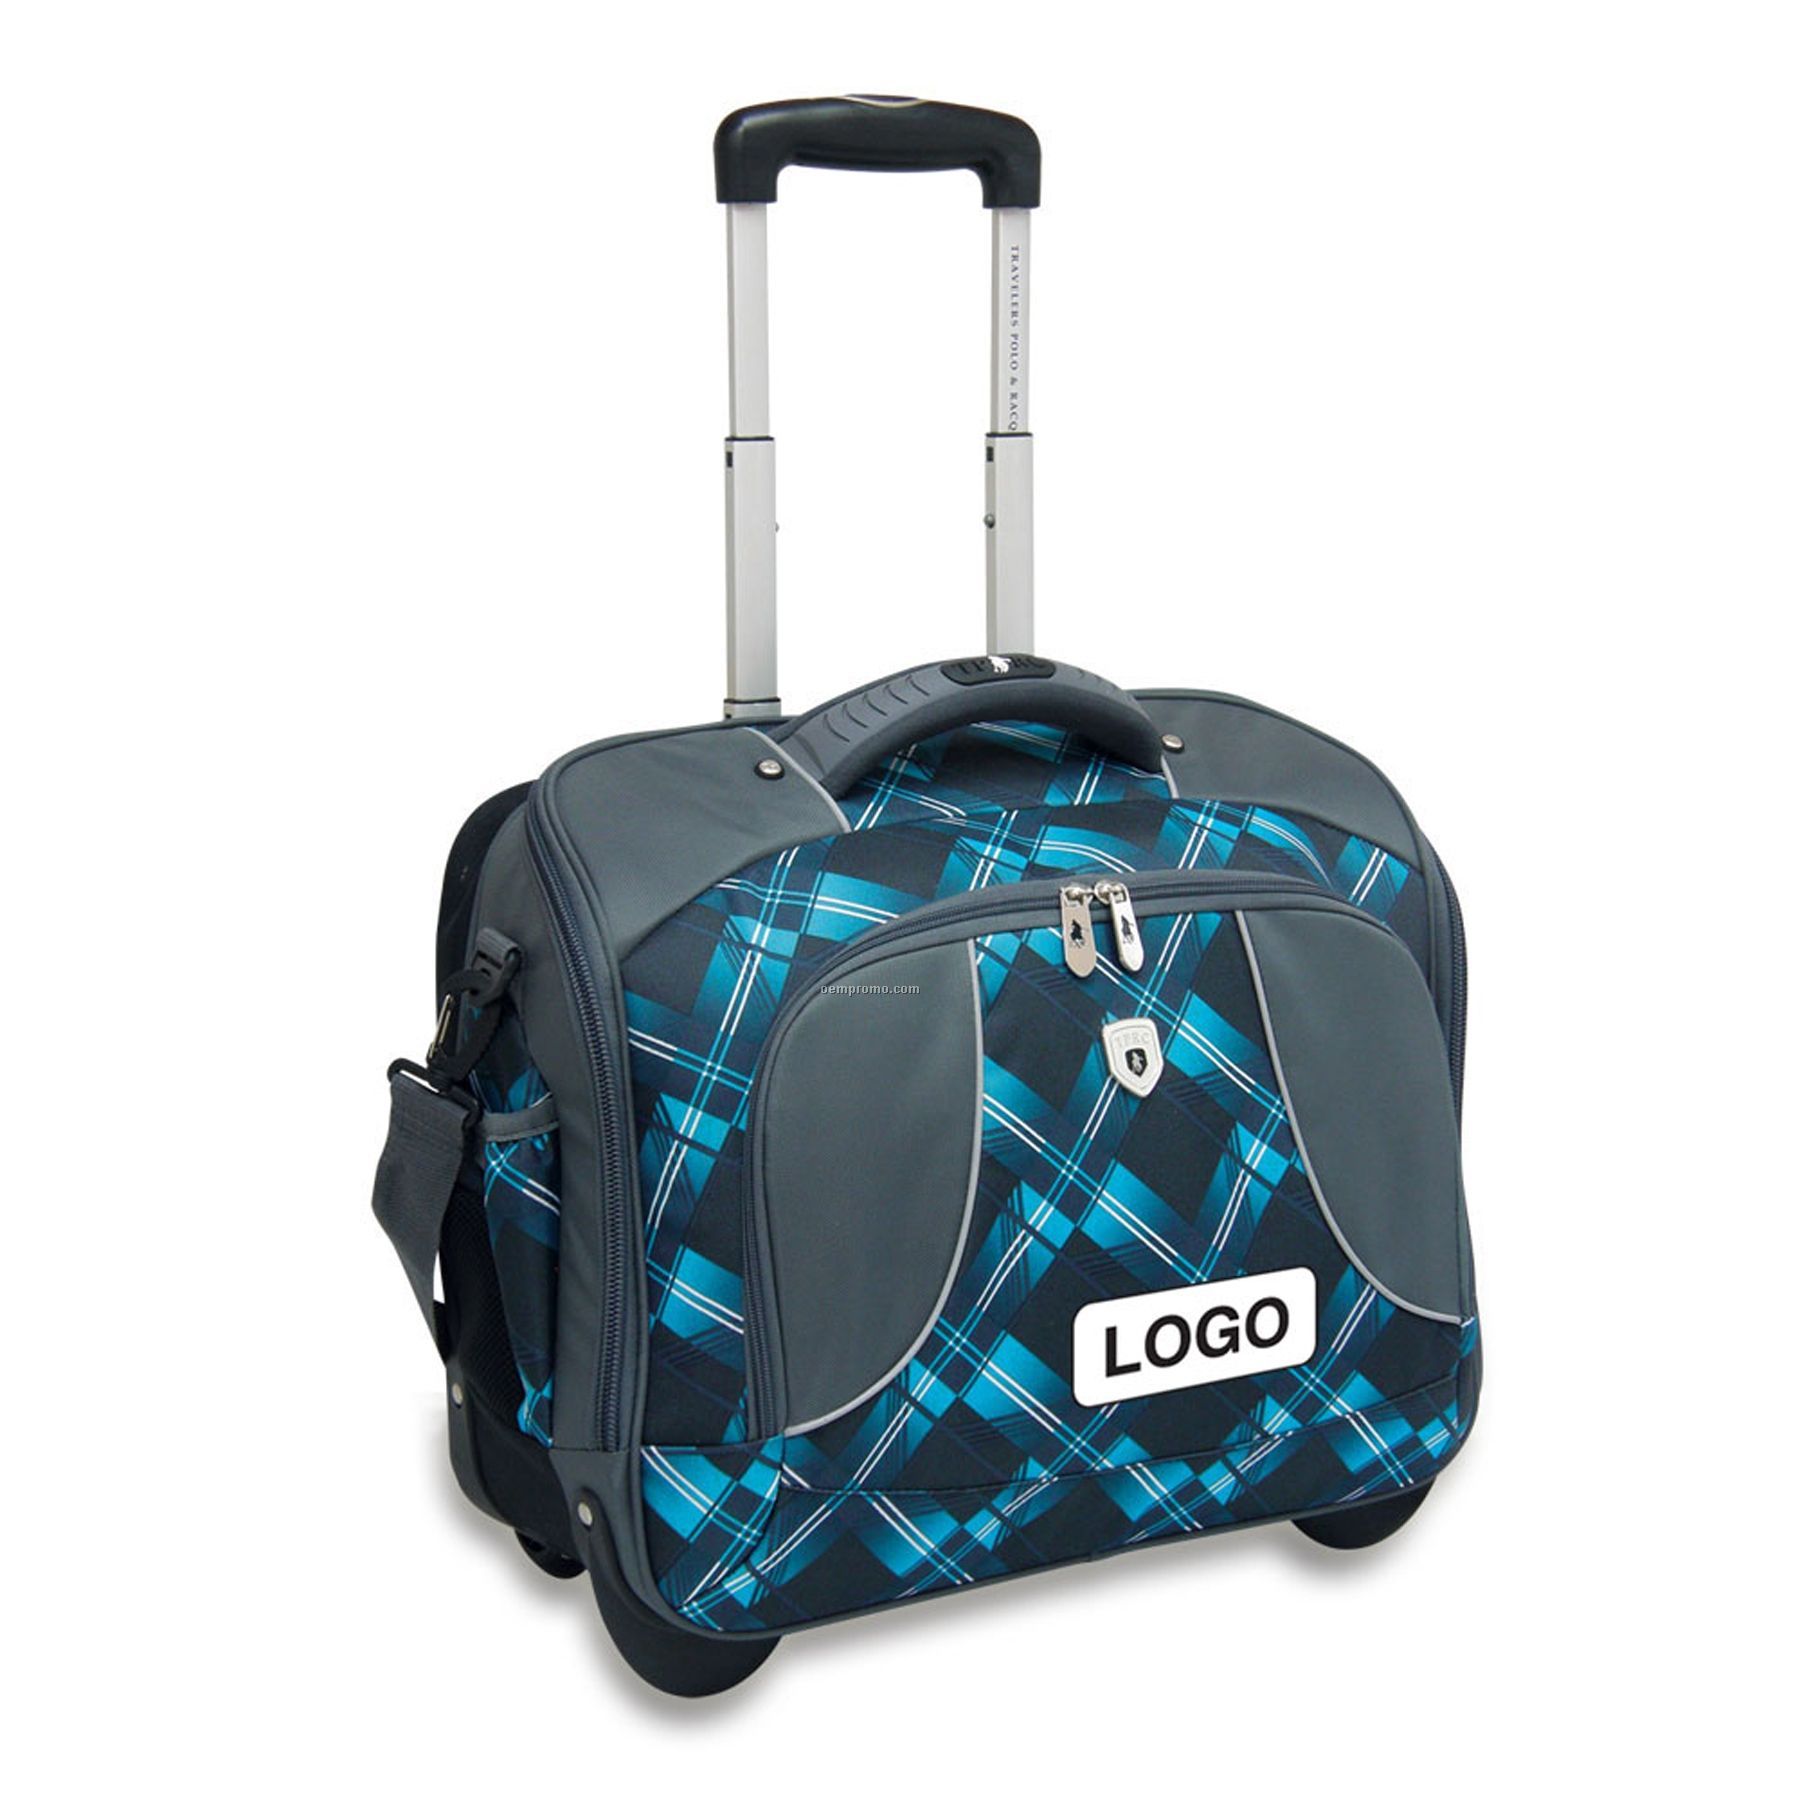 Odyssey I Collection 17" Rolling Laptop Bag